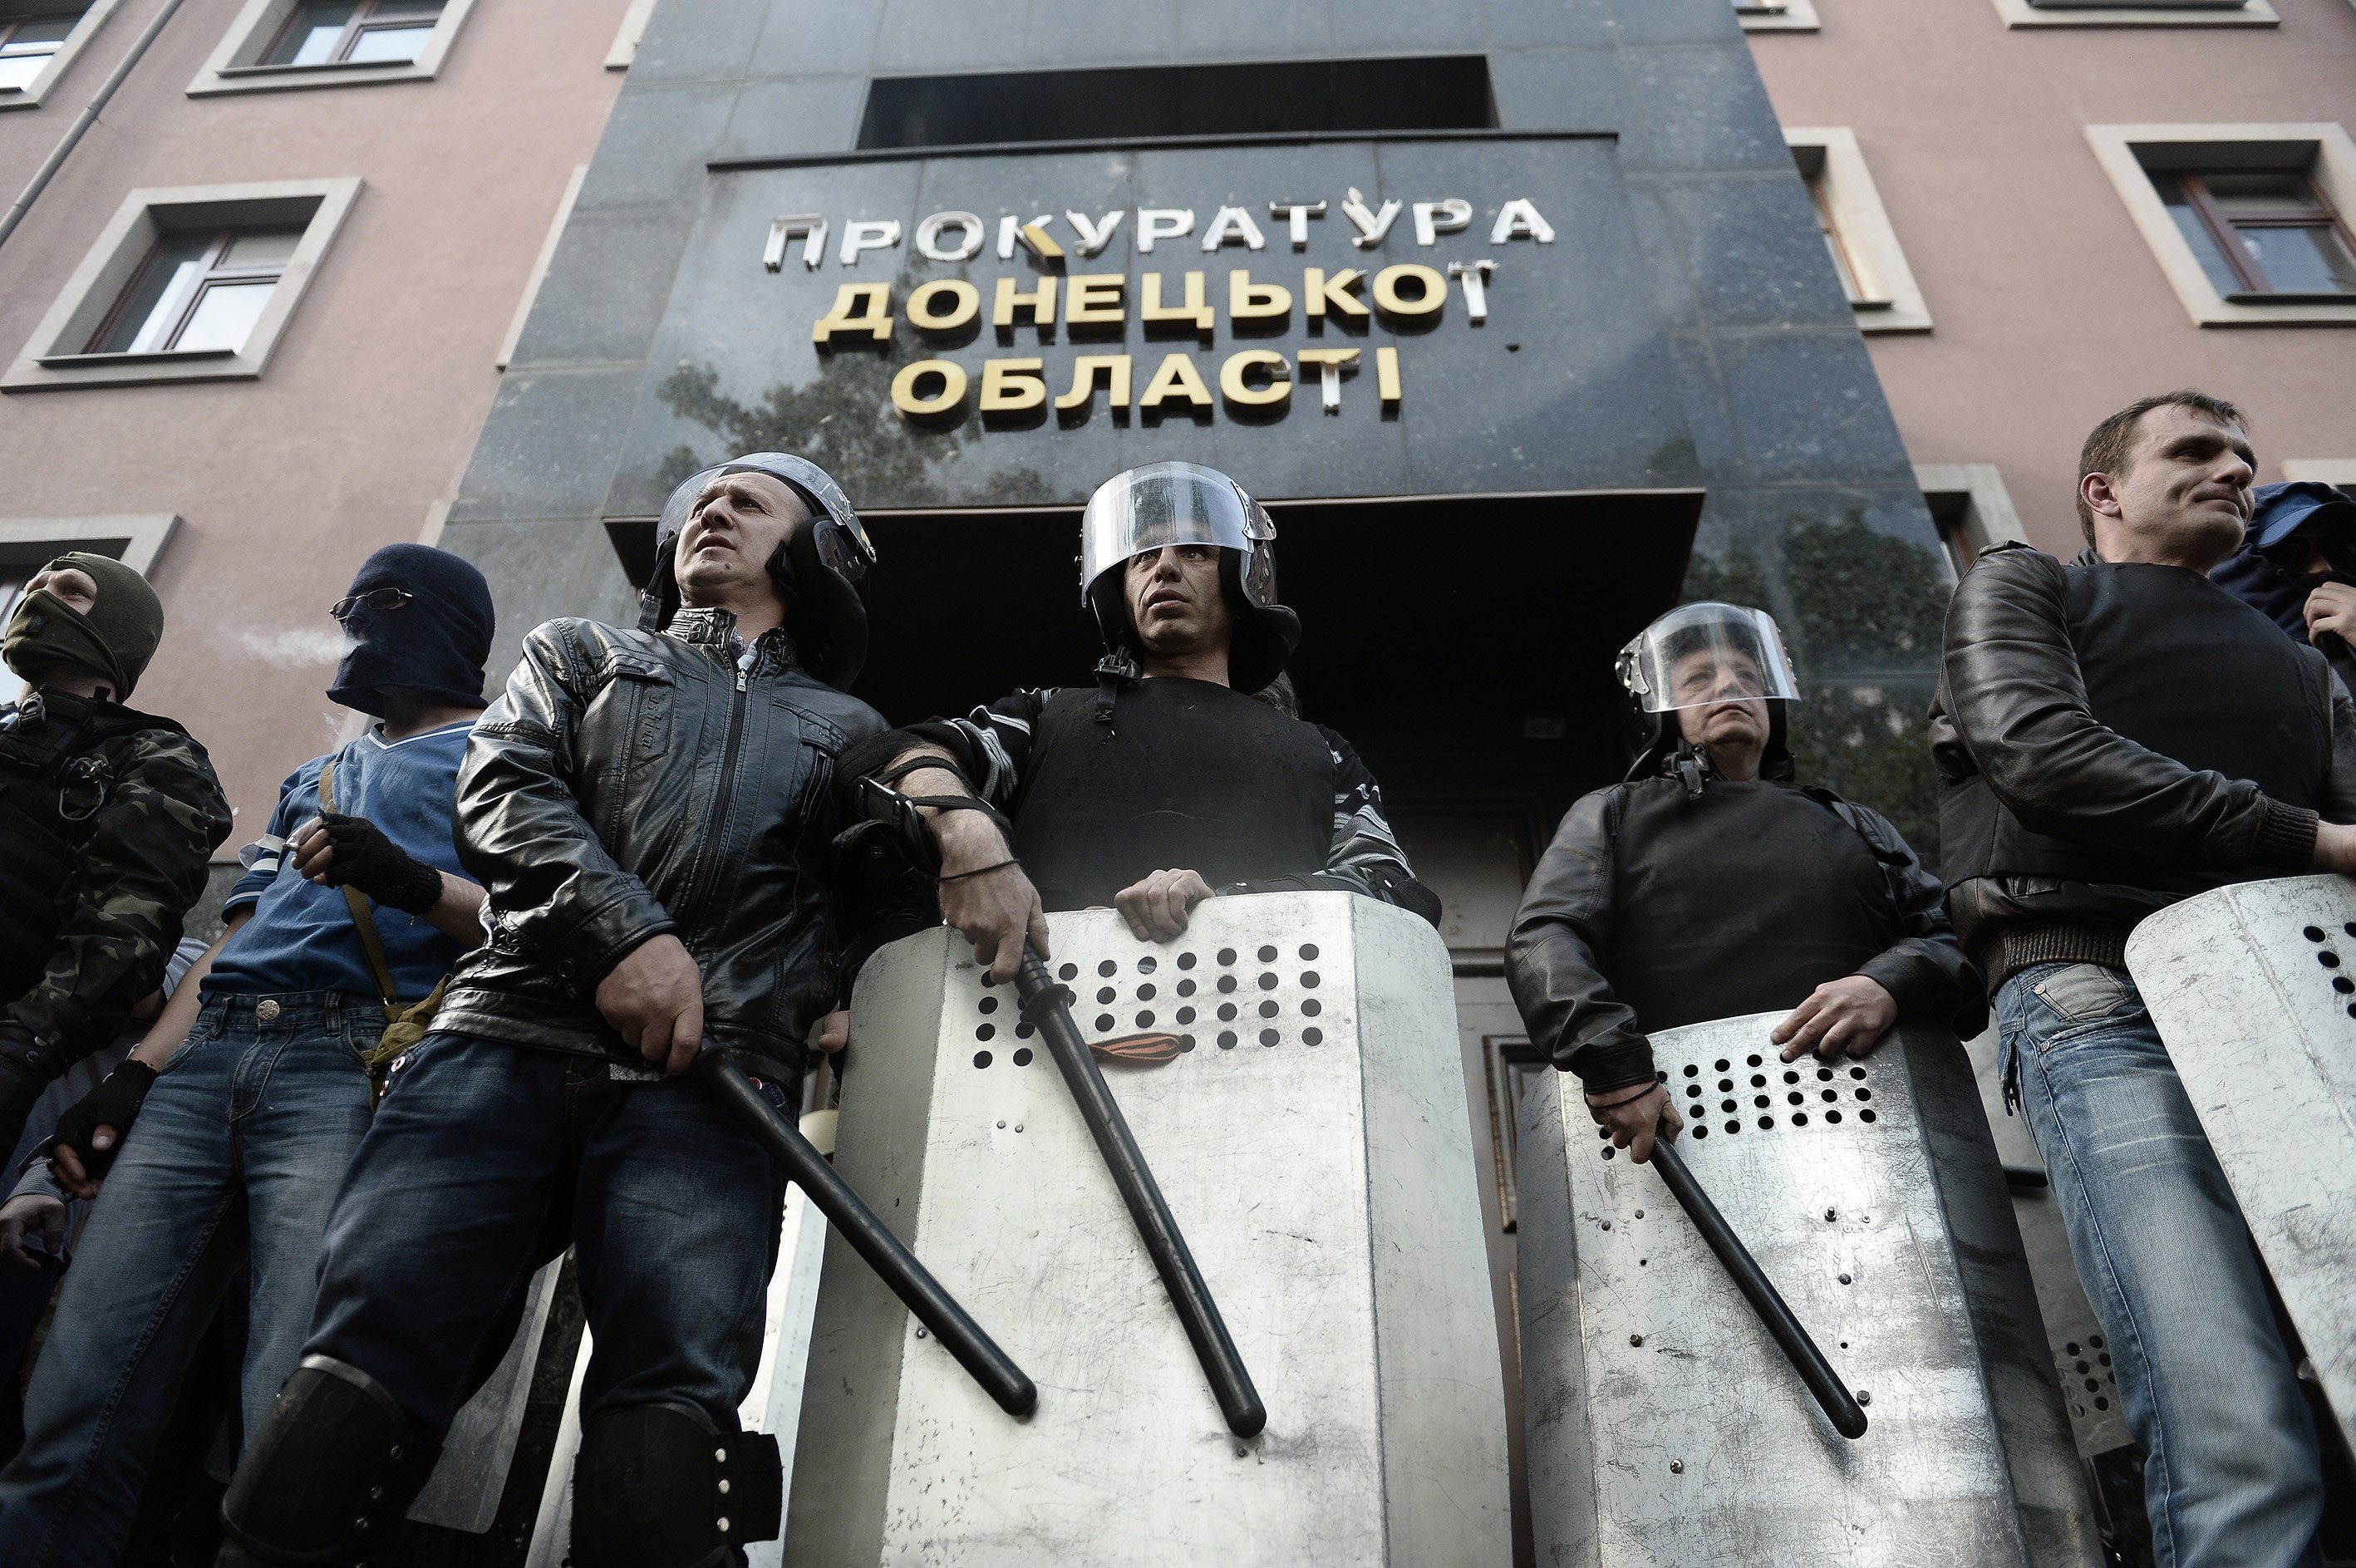 Pro-Russian separatists seize the Prosecution Office in Donetsk, Ukraine, on May 1, 2014. (Burak Akbulut—Anadolu Agency/Getty Images)